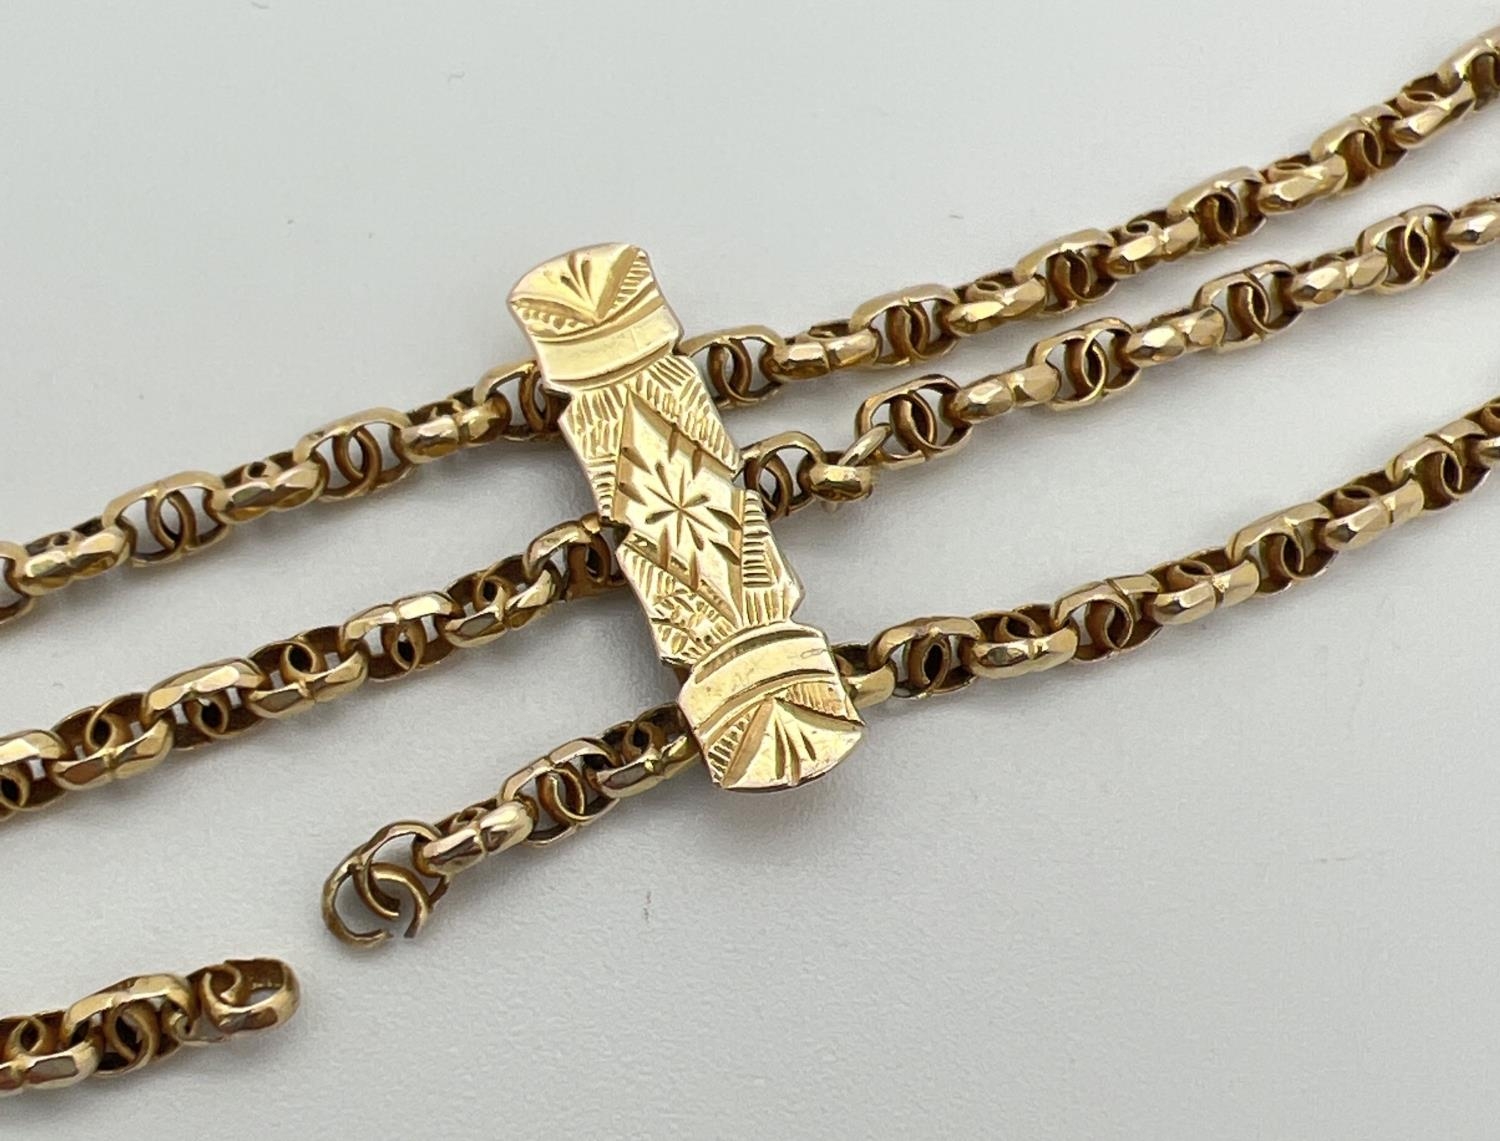 A vintage yellow gold 3 bar style bracelet with decorative chain links and rose gold lobster claw - Image 3 of 4